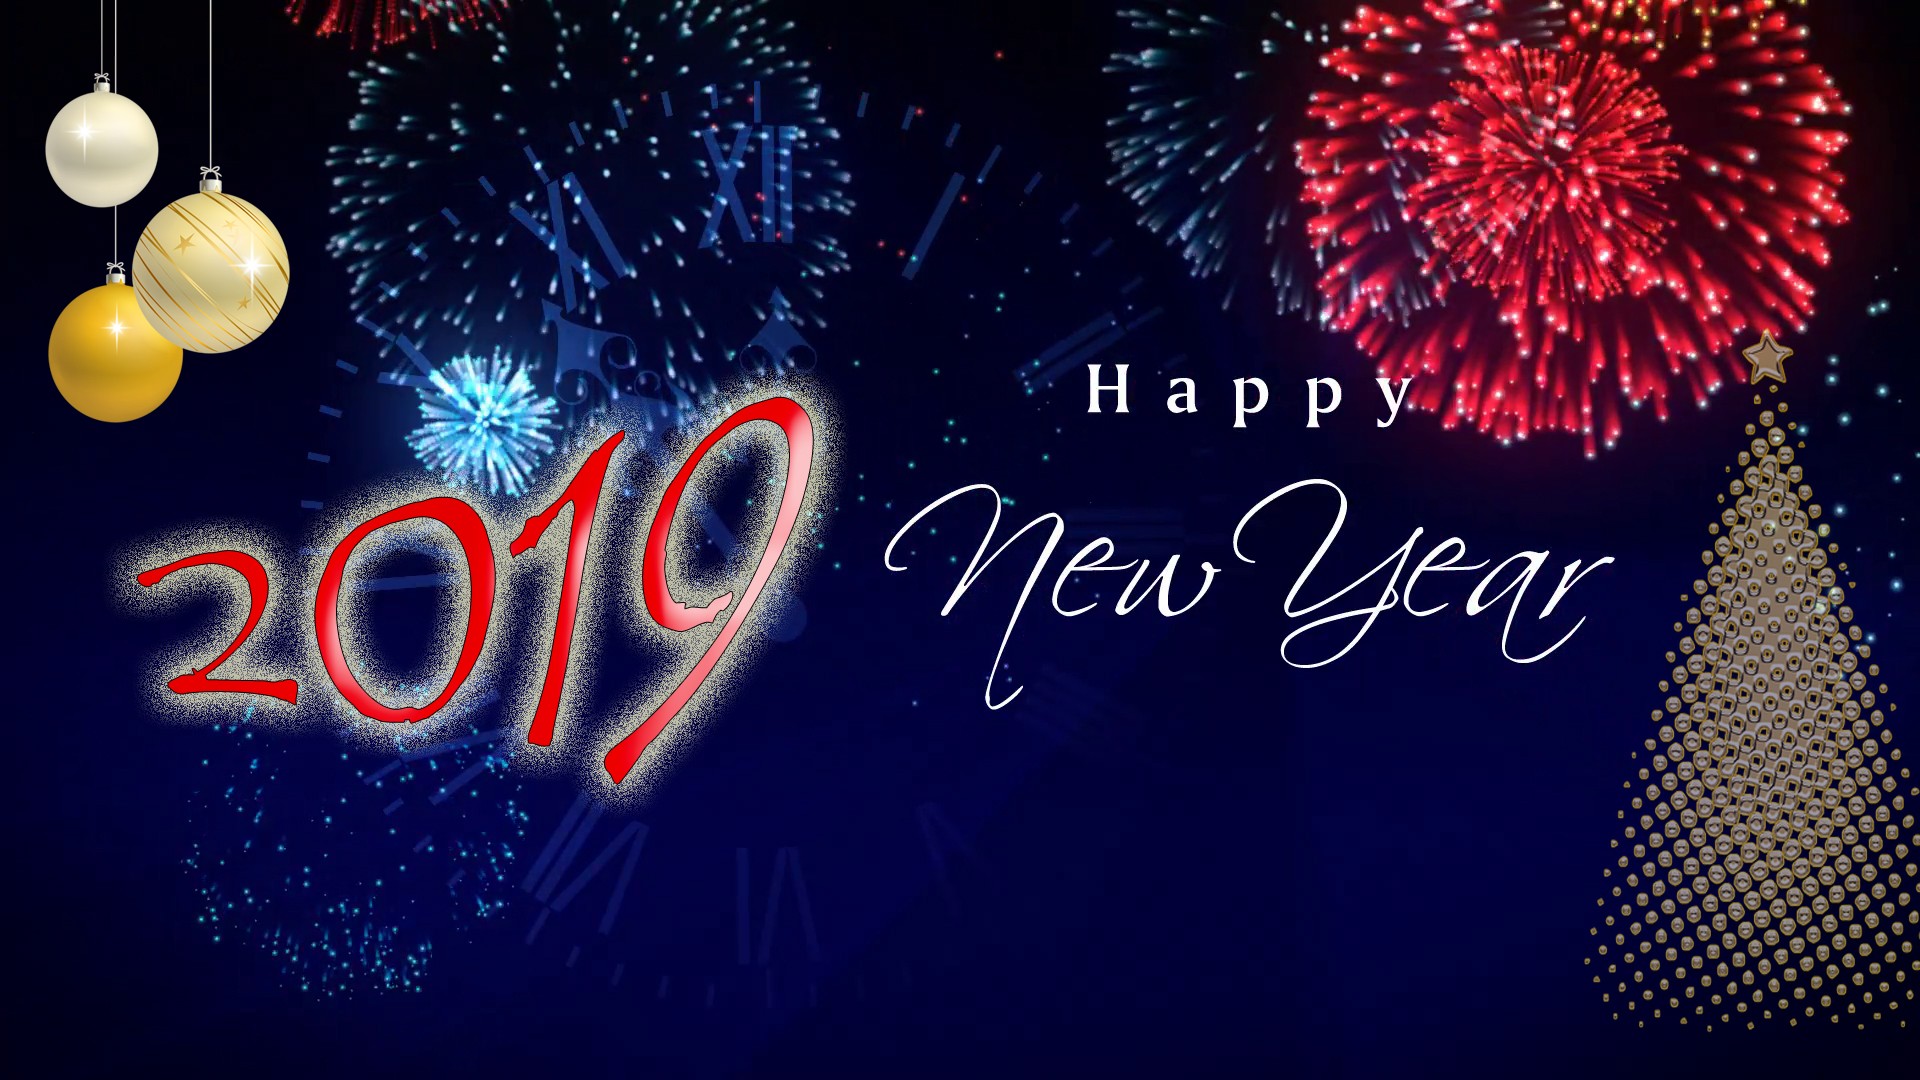 Happy New Year 2019 Images Wishes Quotes Greetings - New Year Hd Wallpaper 2019 - HD Wallpaper 